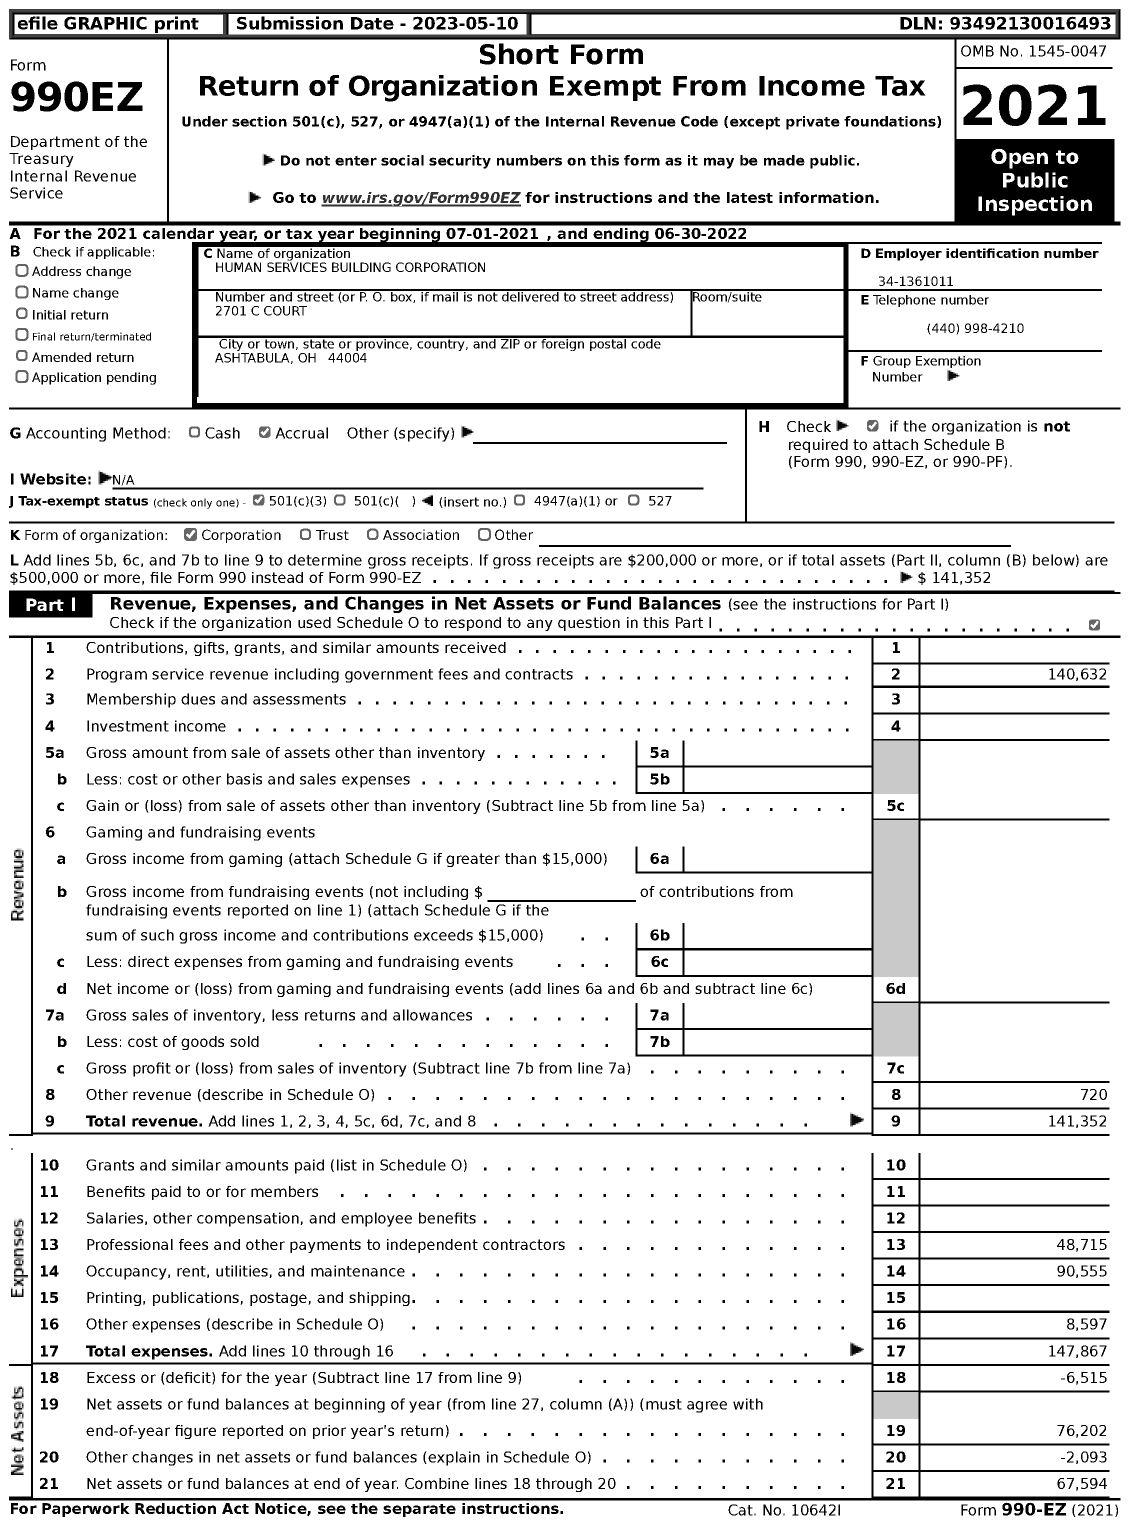 Image of first page of 2021 Form 990EZ for Human Services Building Corporation